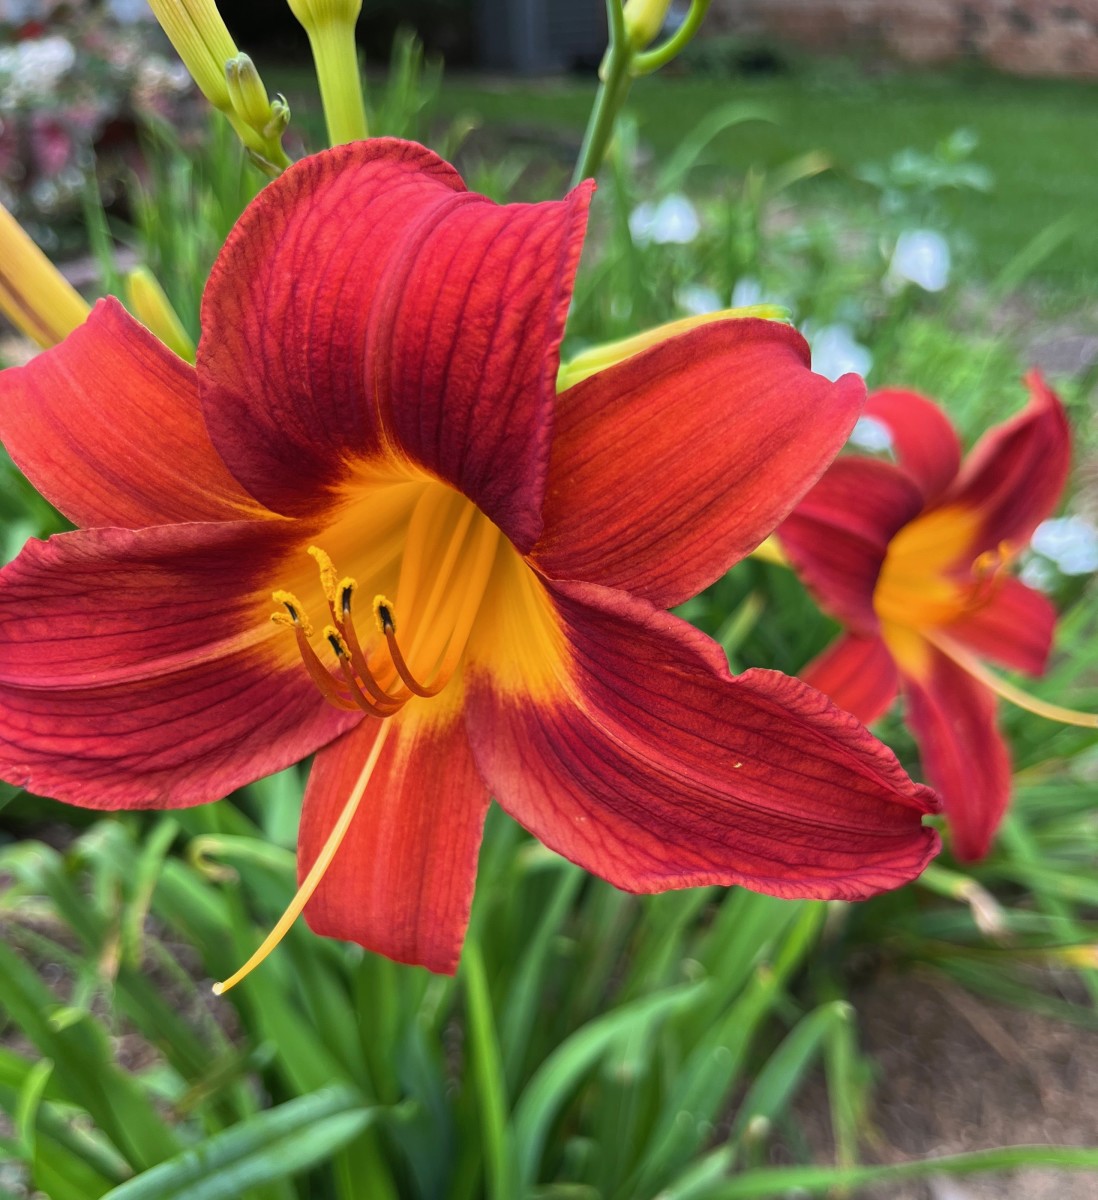 This one was given to me by a neighbor who was dividing her huge spread of day lilies.